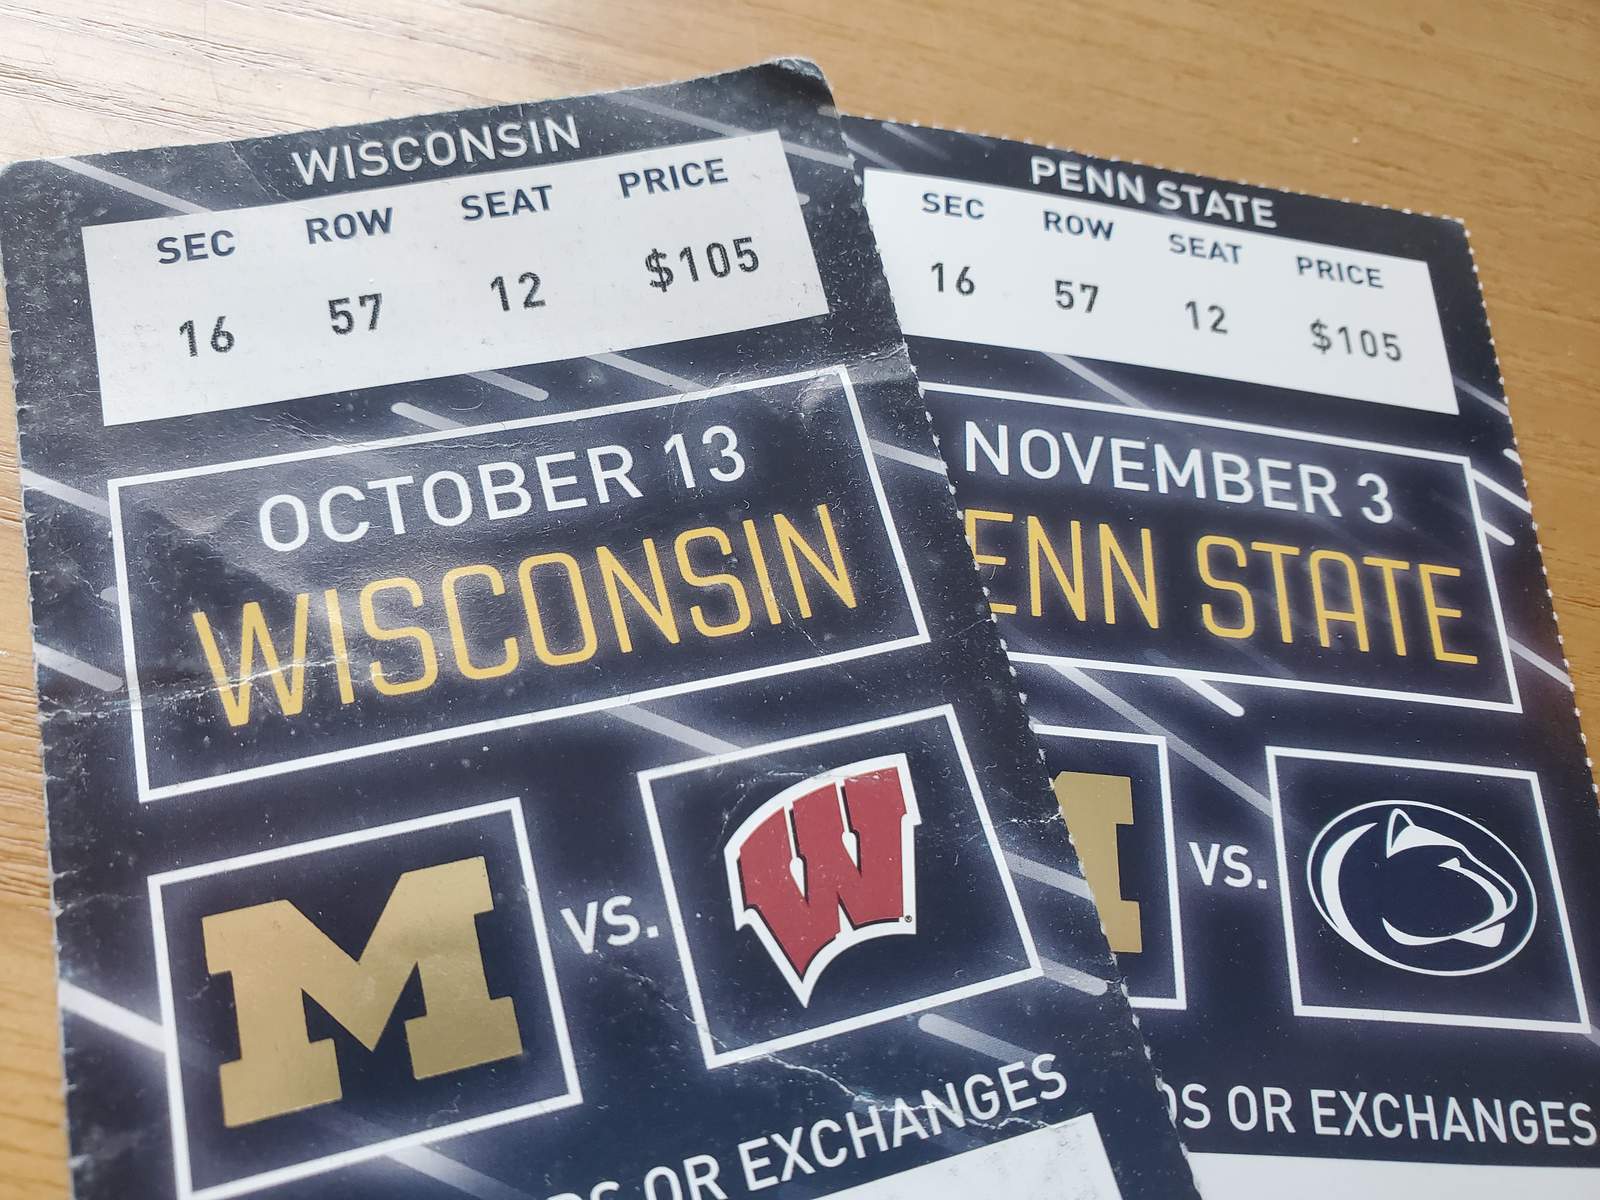 5 major takeaways from Michigan football ticket policy announcement